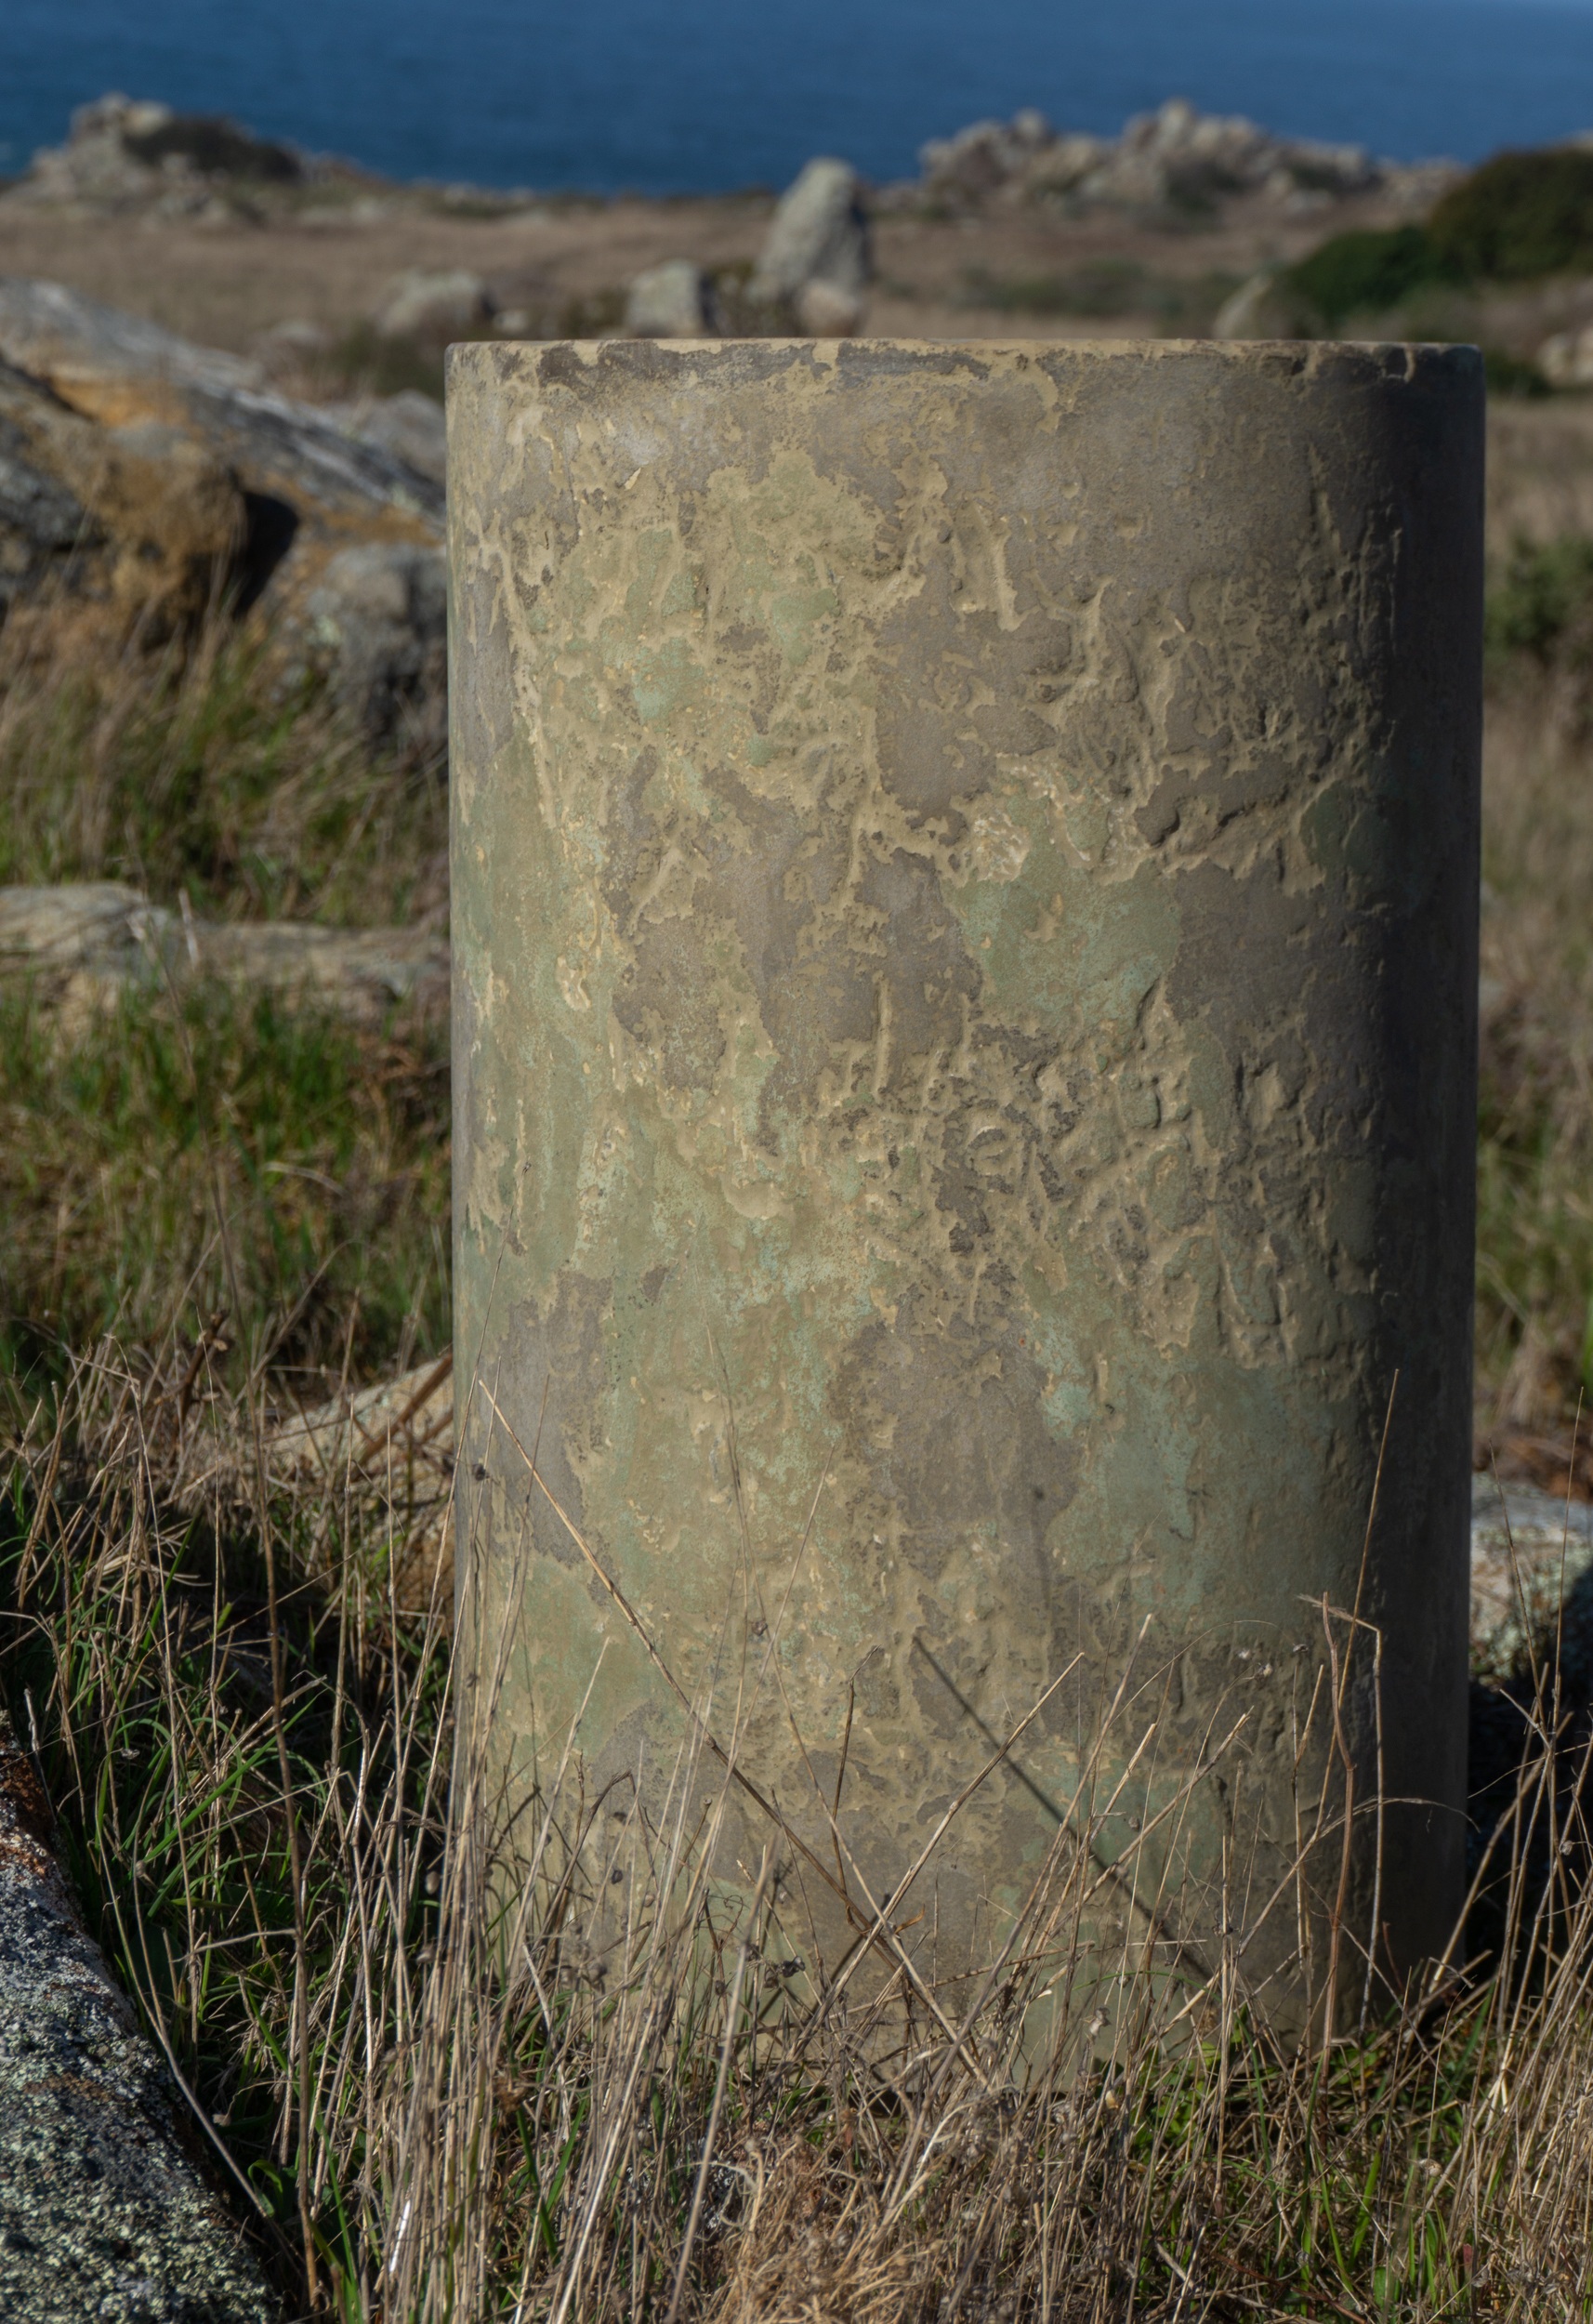 Closeup of Small concrete stool in green and brown at gerstle cove bluffs